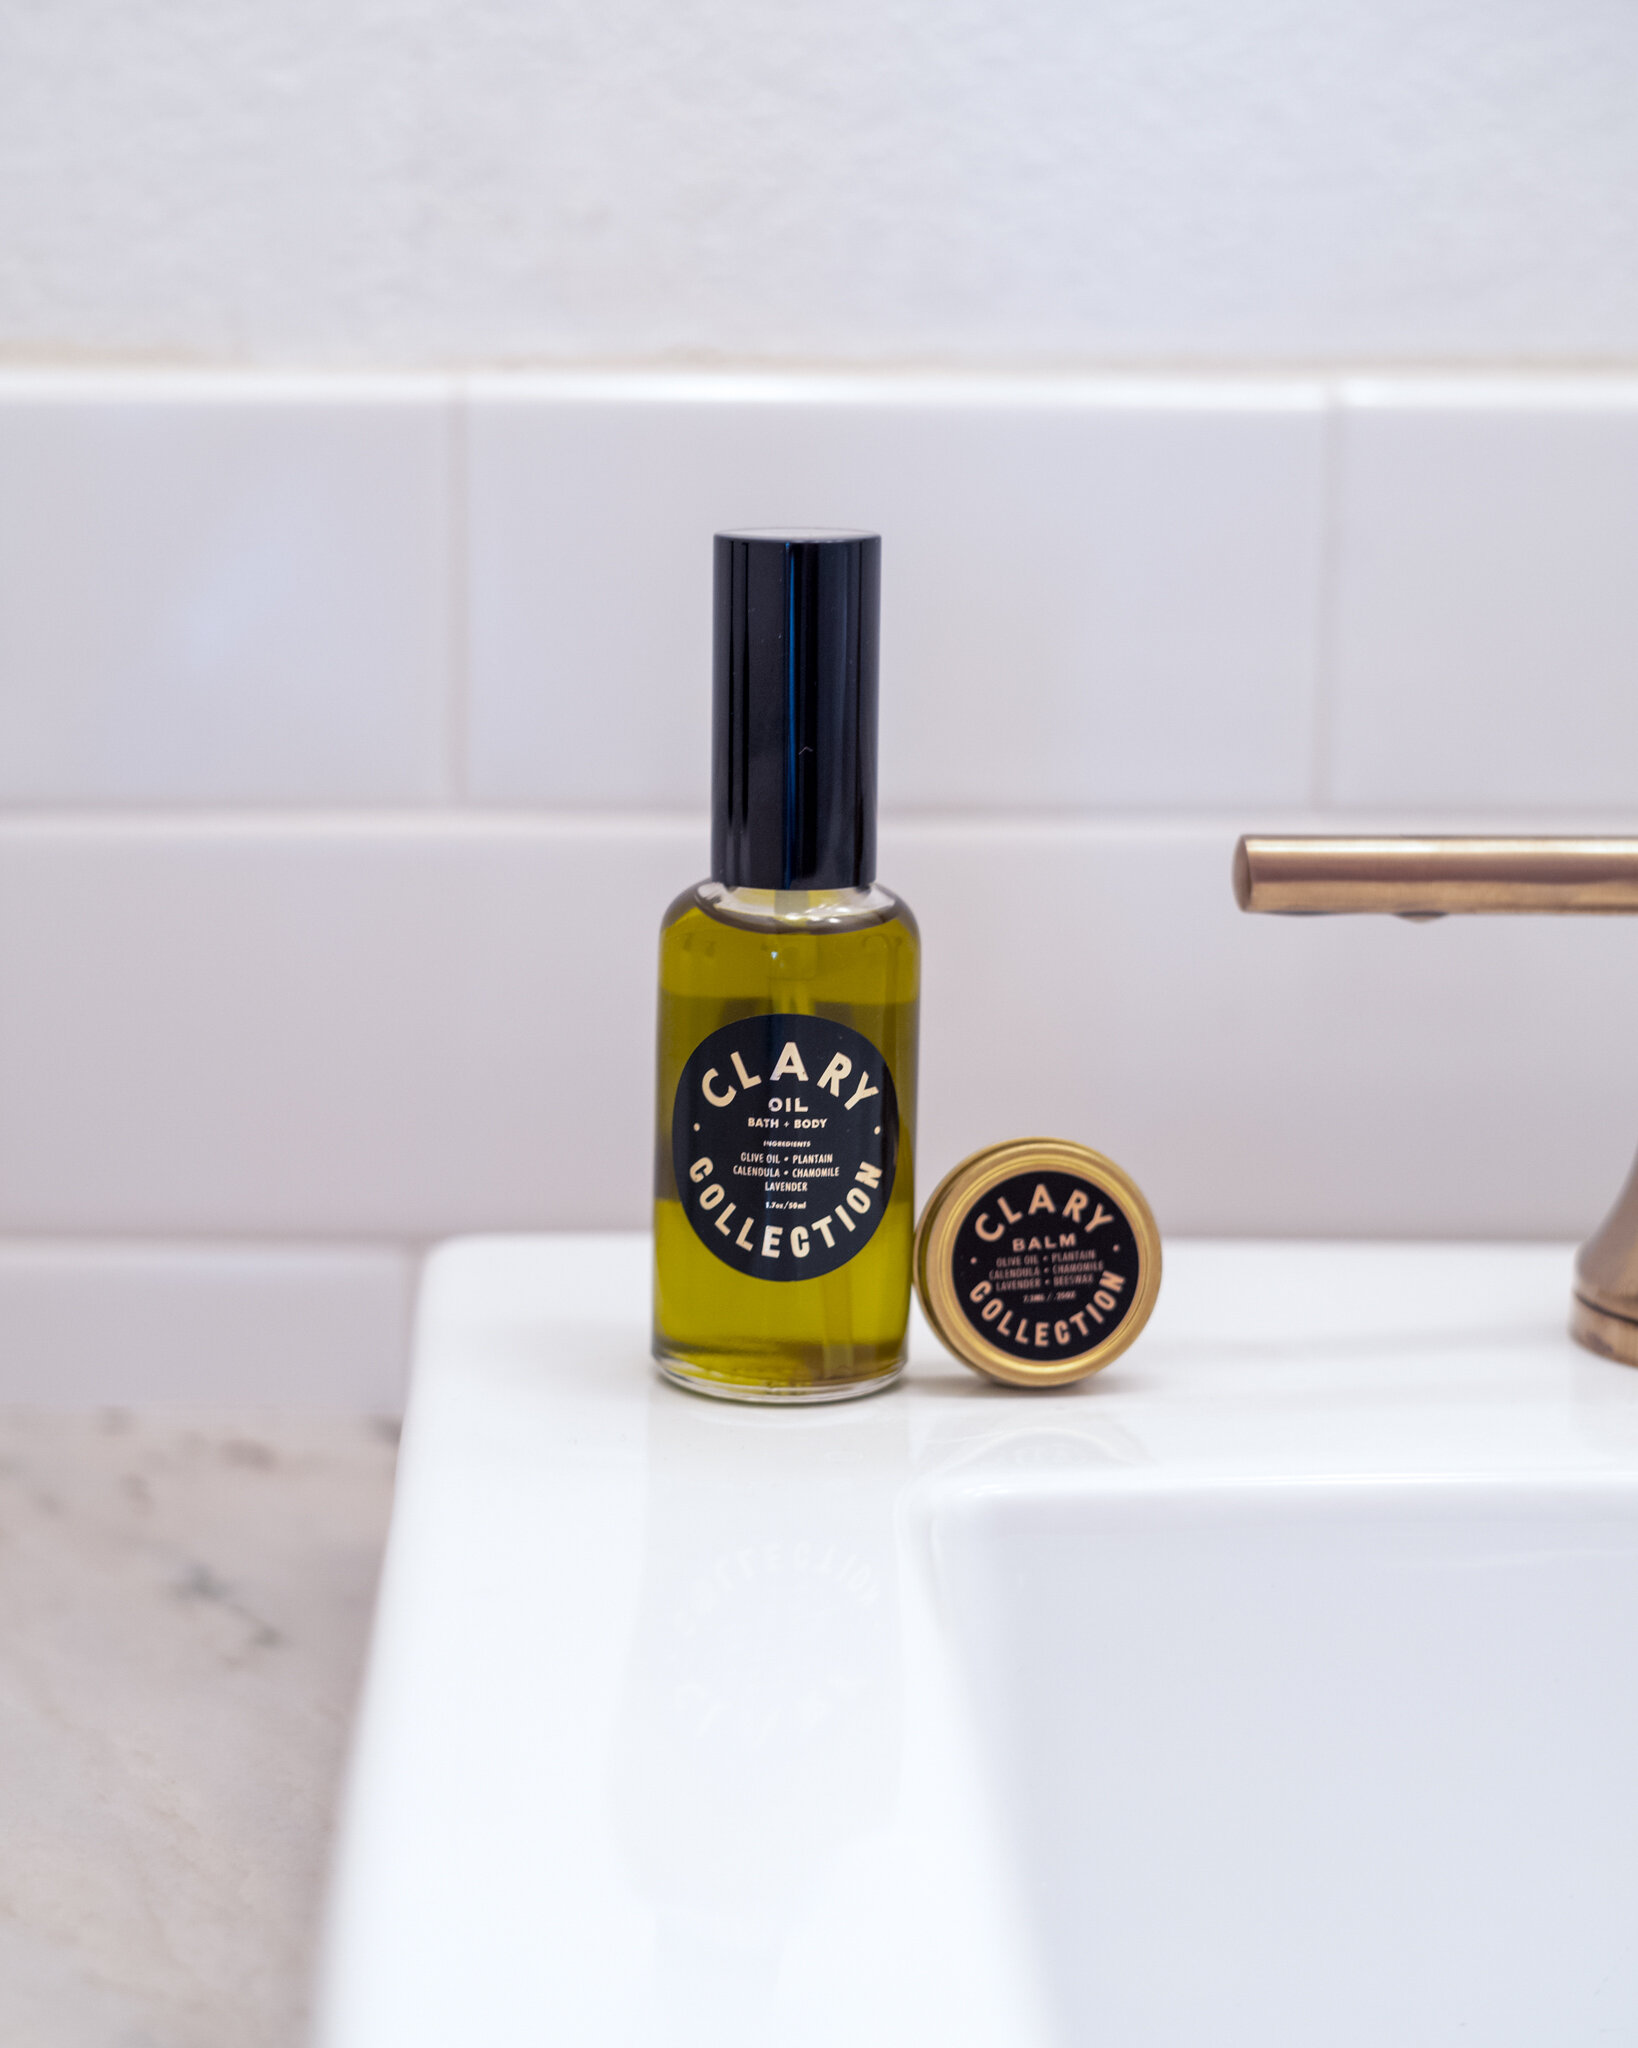  Clary Collection Bath + Body Oil  and All Purpose Balm — Complimentary to Sidereal Haus Guest   Photo Credit: Bailey Beckstead 